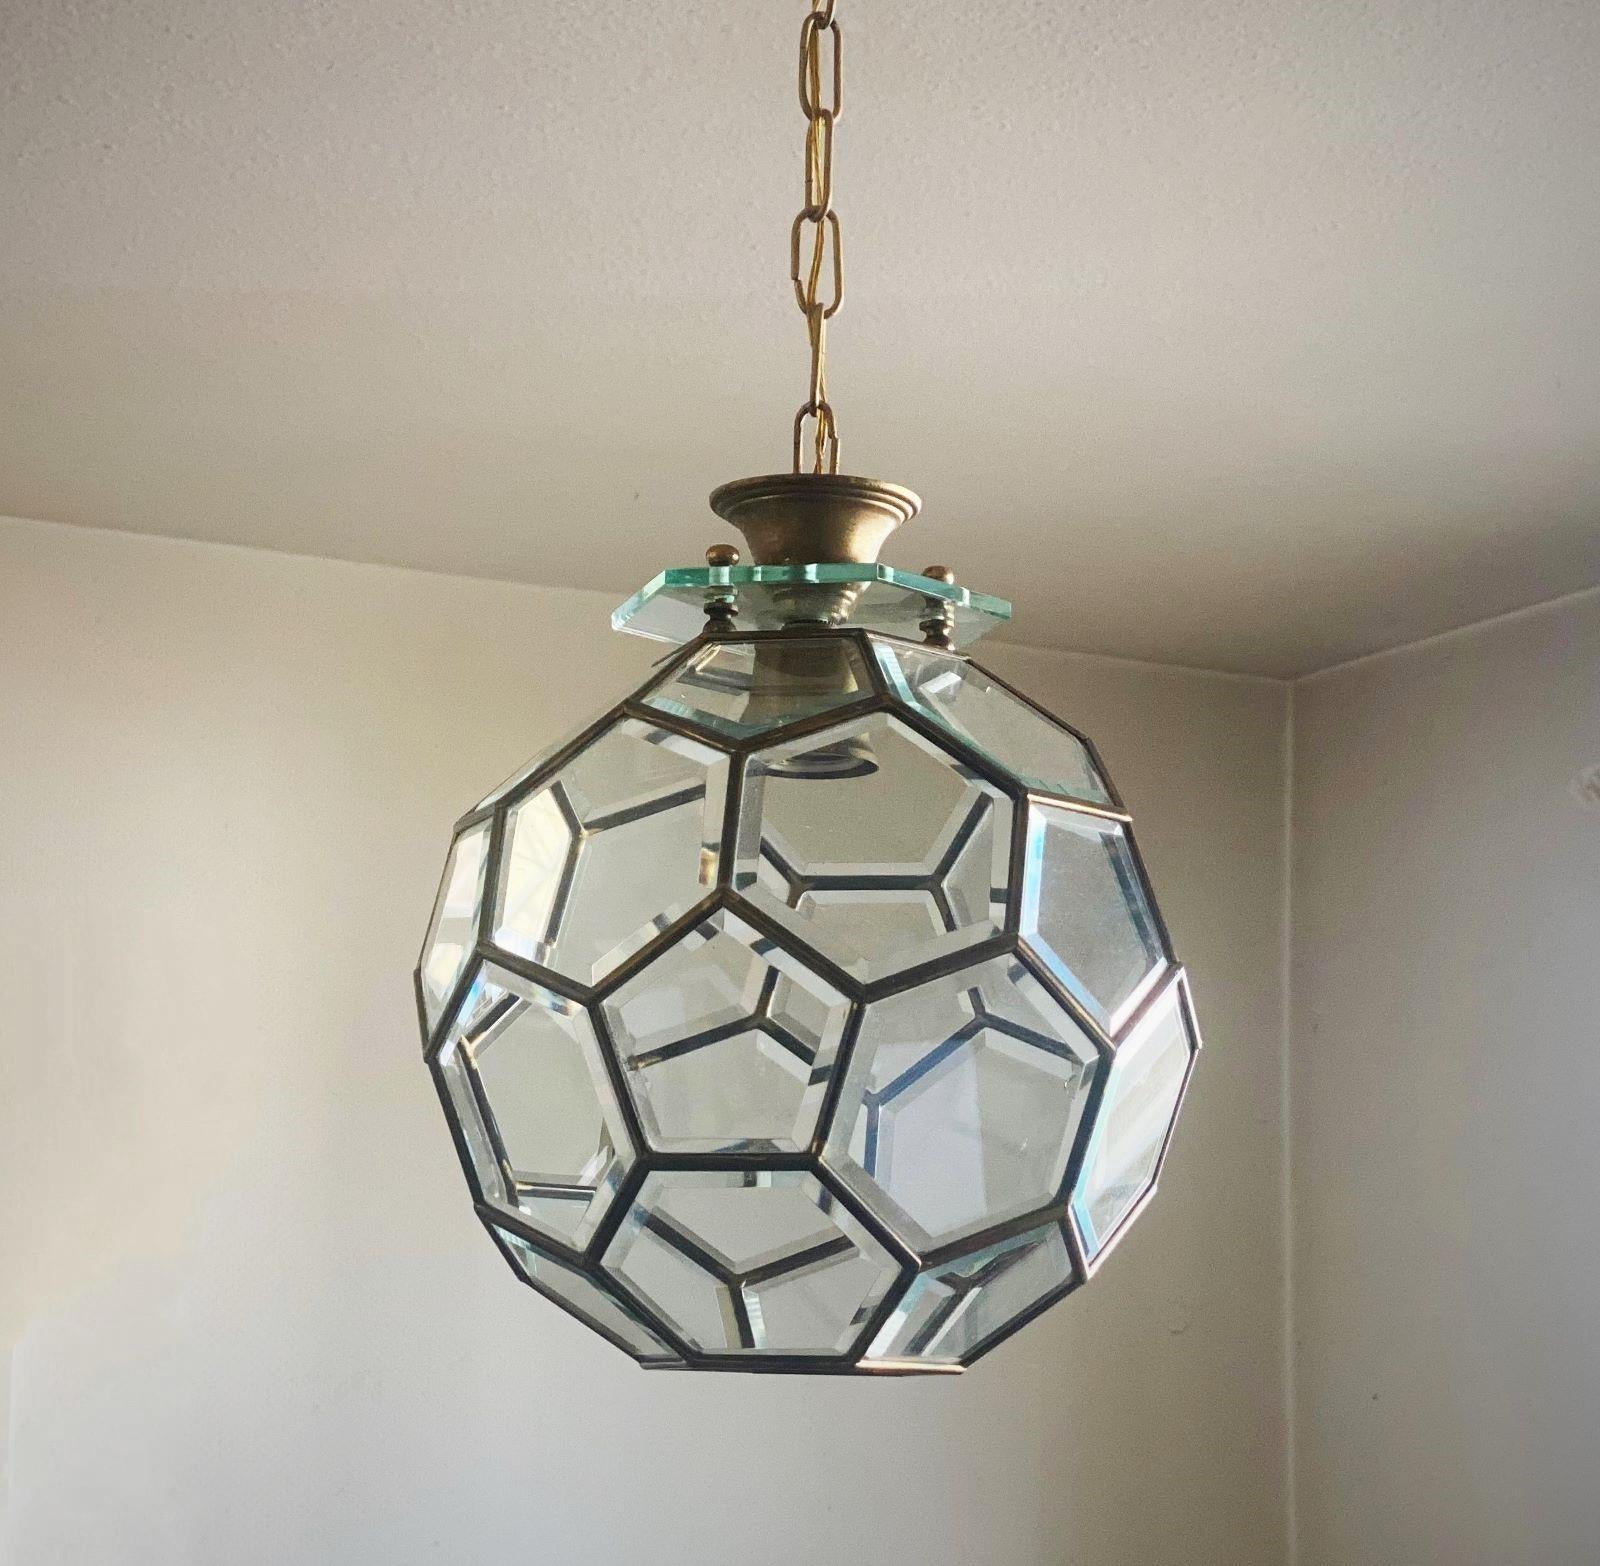 A Mid-Century Modern Fontana Arte pendant or lantern, Italy, 1950s. Geometrical faceted ultra clear glass panels with brass beaded frames, brass canopy and chain. It takes one Edison E27 large sized screw bulb. The lantern is in fine vintage